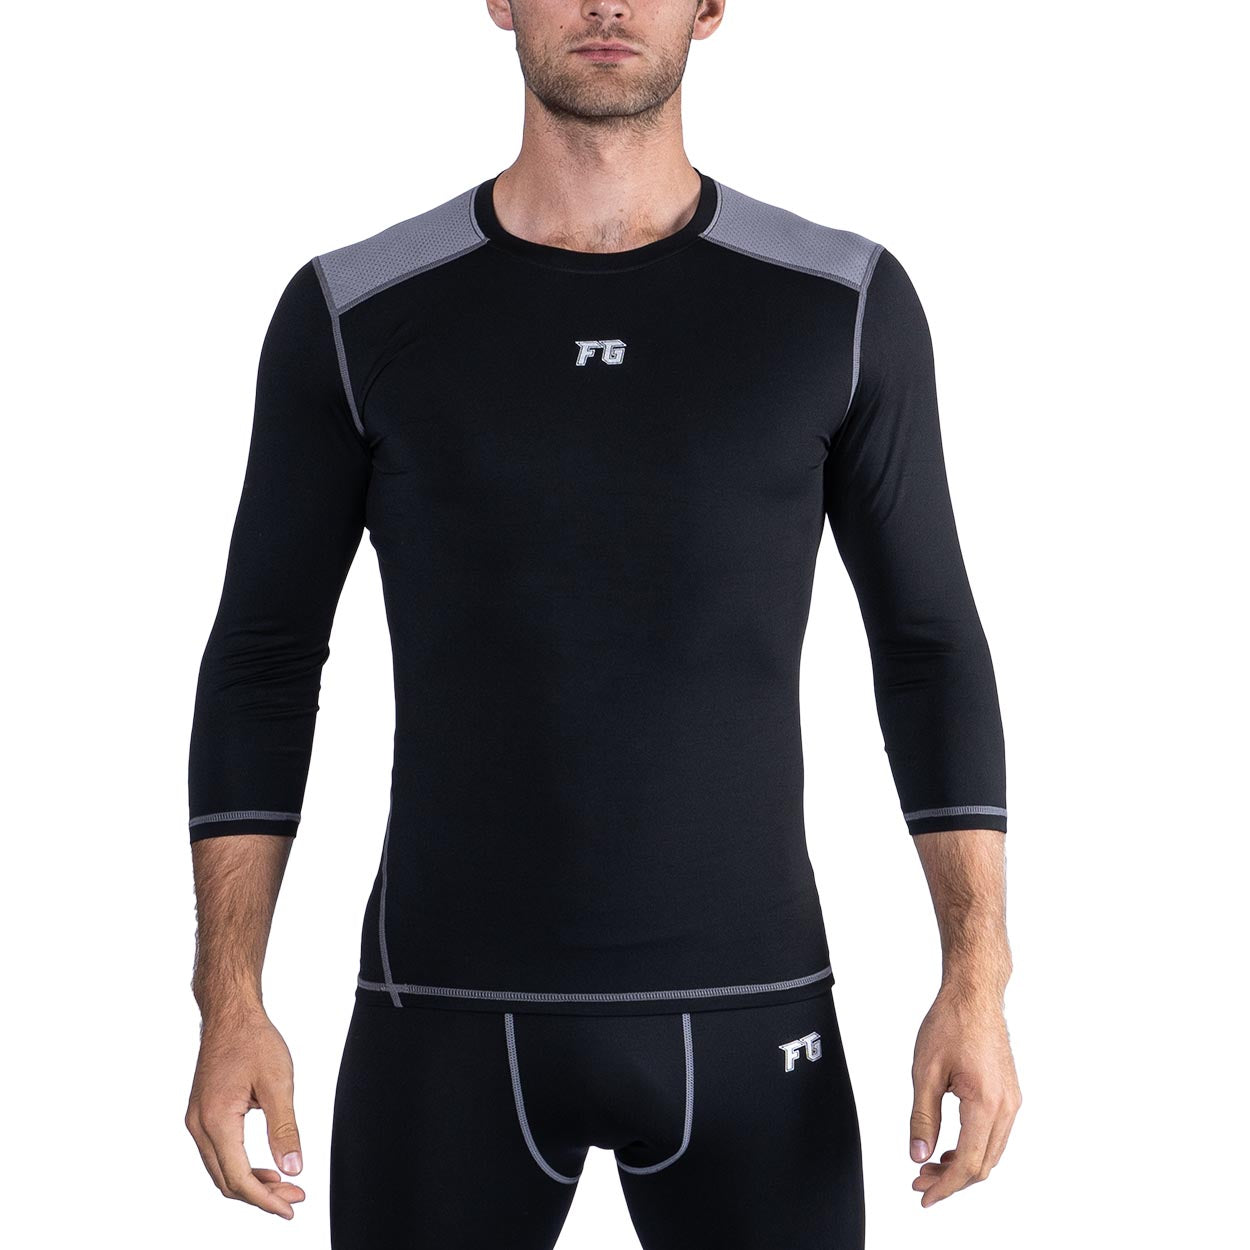 CombatX Summer 3/4 Compression Shirt - Youth - SPECIAL DEAL